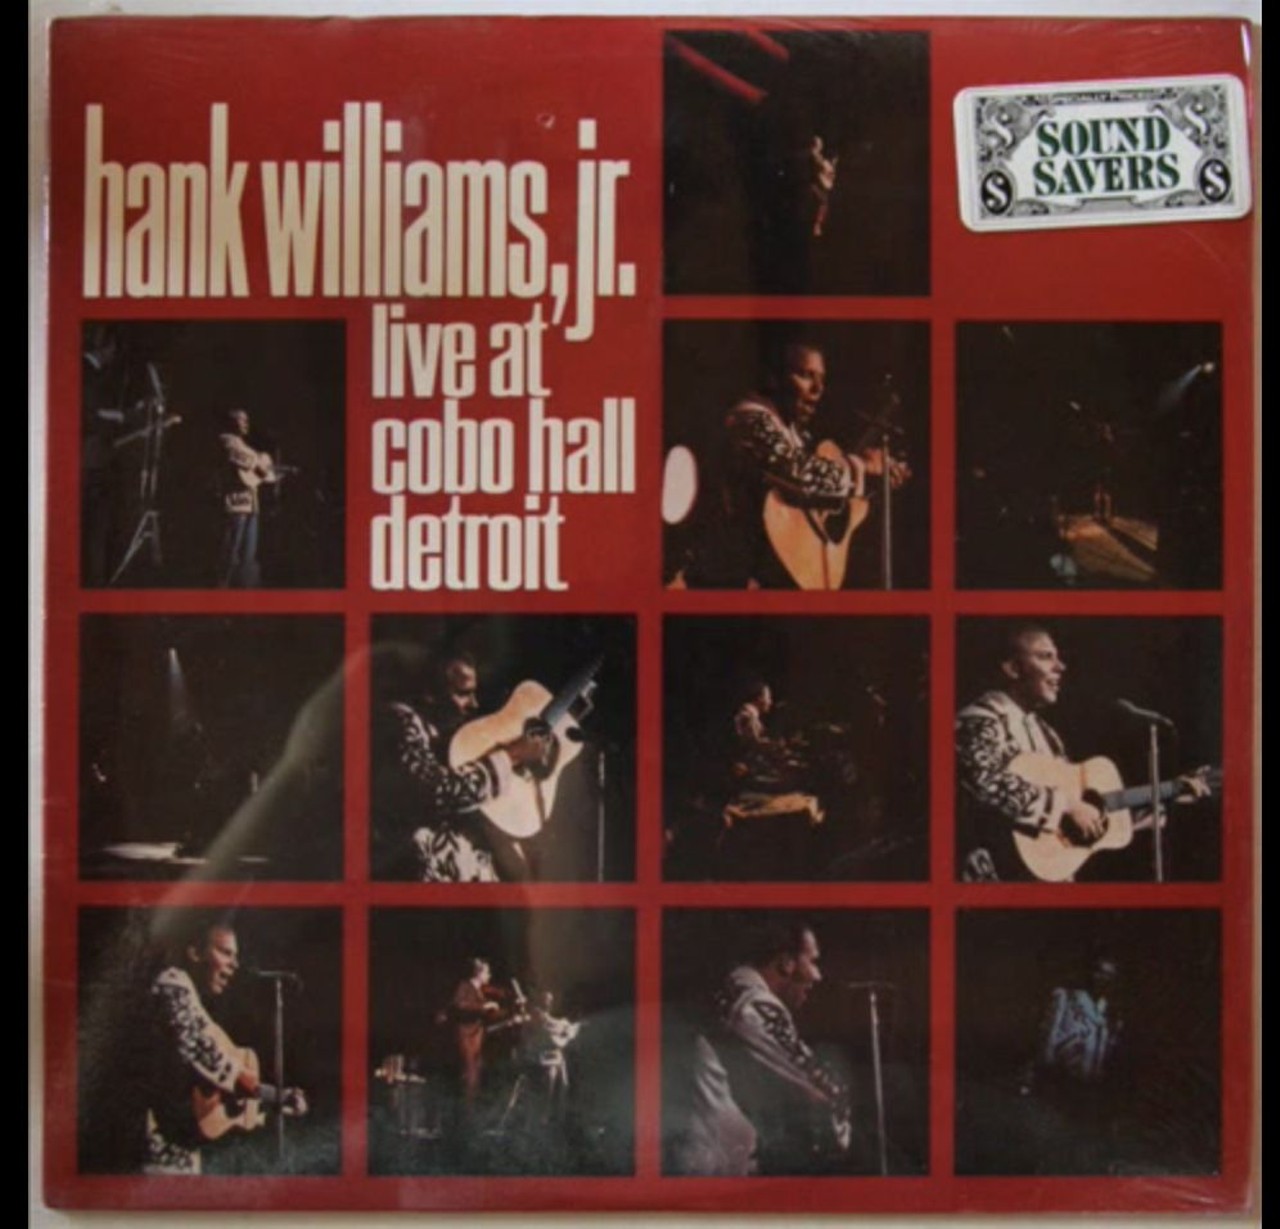  Hank Williams Jr - Live At Cobo Hall Detroit  Recorded at Cobo Hall in 1969, Williams played hits like "Your Cheatin' Heart" and, of course "Detroit City."